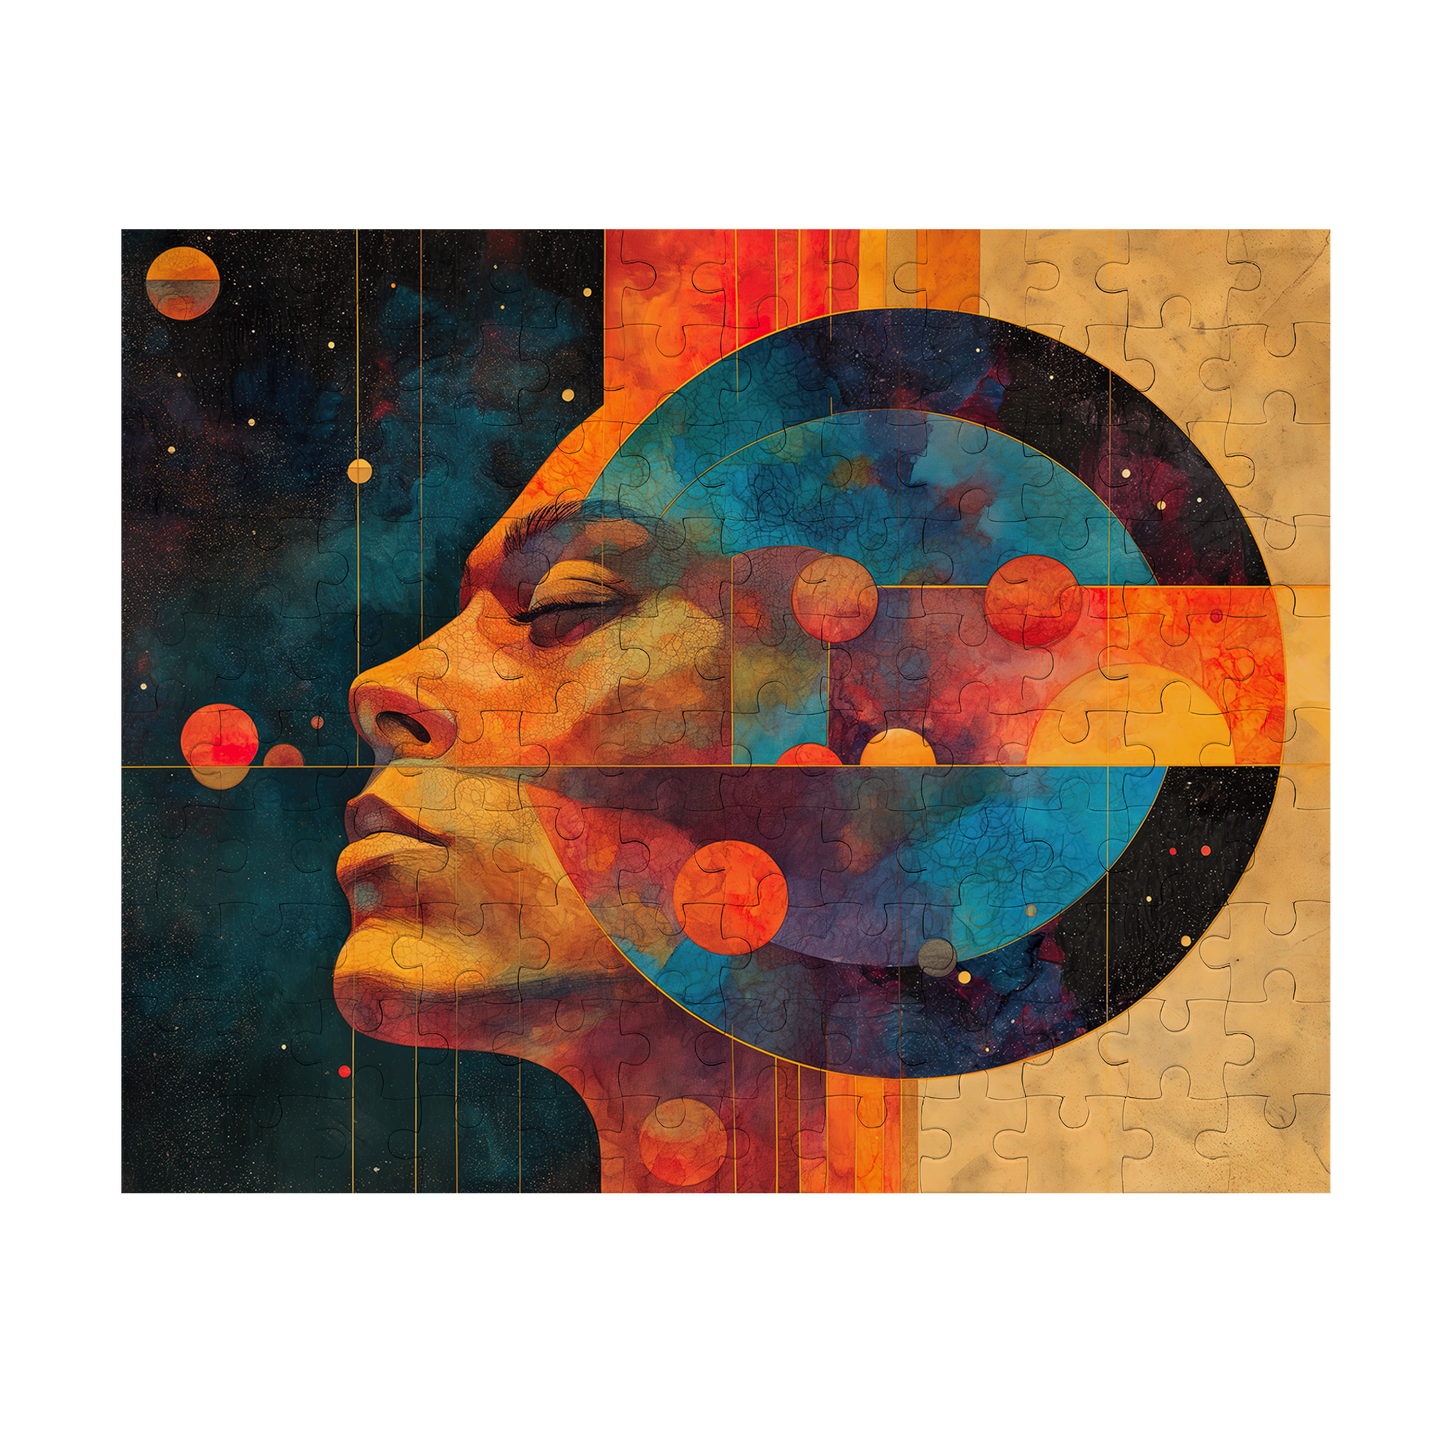 Deep Thought - Premium Jigsaw Puzzle, Vibrant, Sci-fi - Multiple Sizes Available